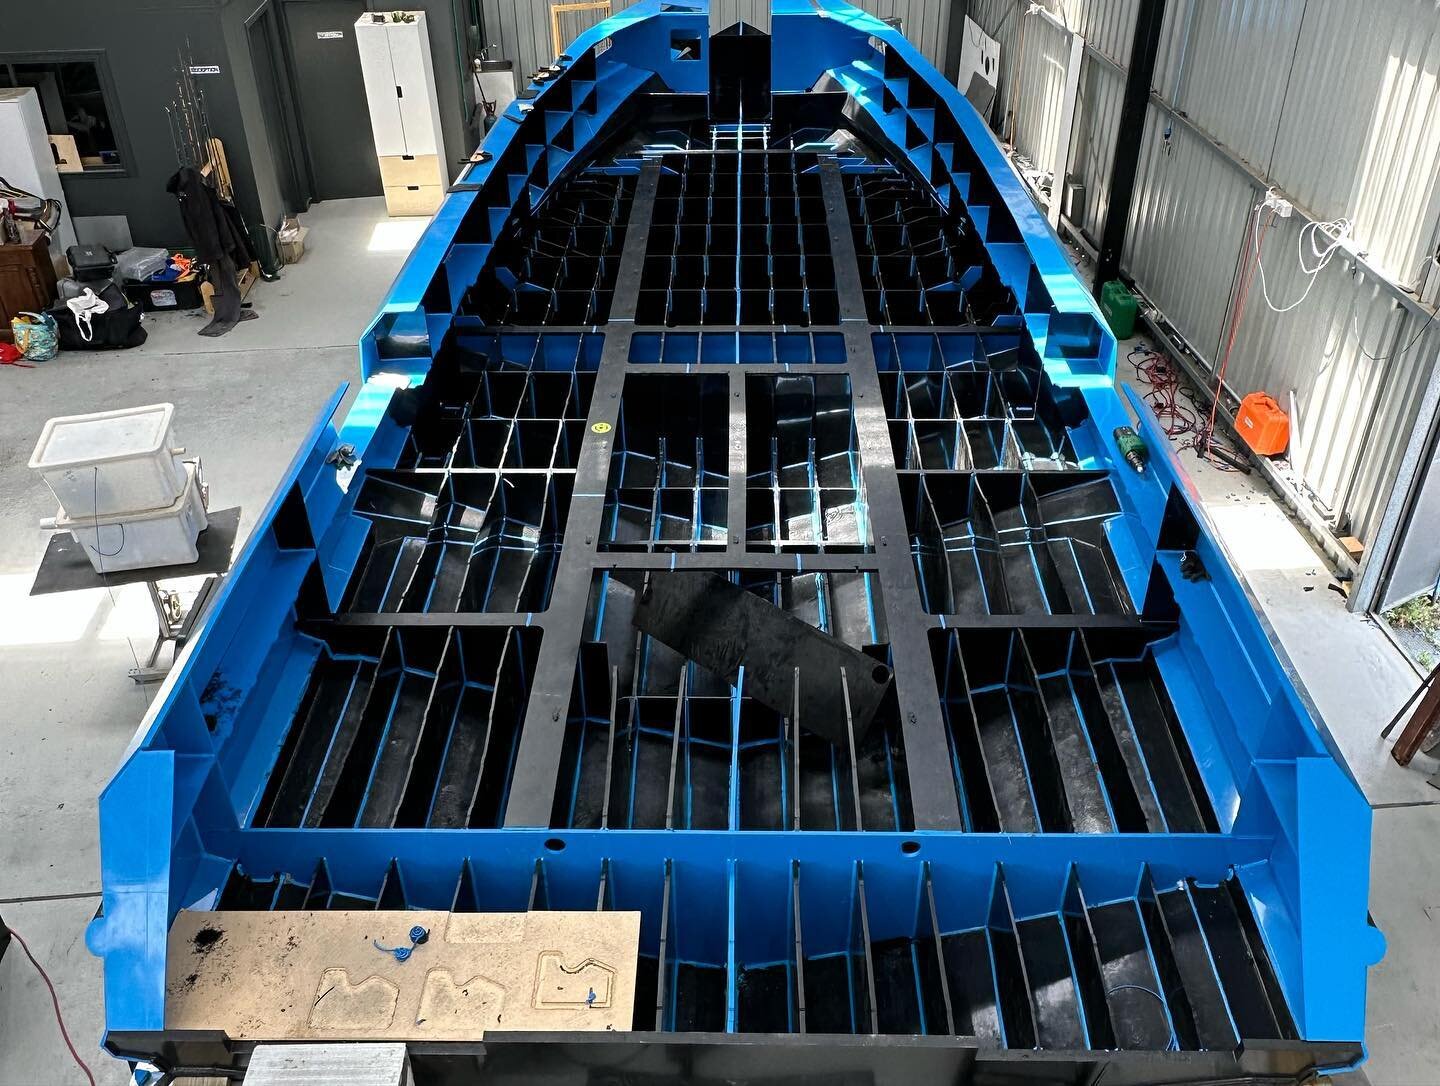 While the rest of us having been having a Christmas break, Dale at #hdpmarine has been working away on the @alumarine.net.au 12m HDPE Z bow demo boat. #hdpeboats #australianboats #commercialboats #polyboat